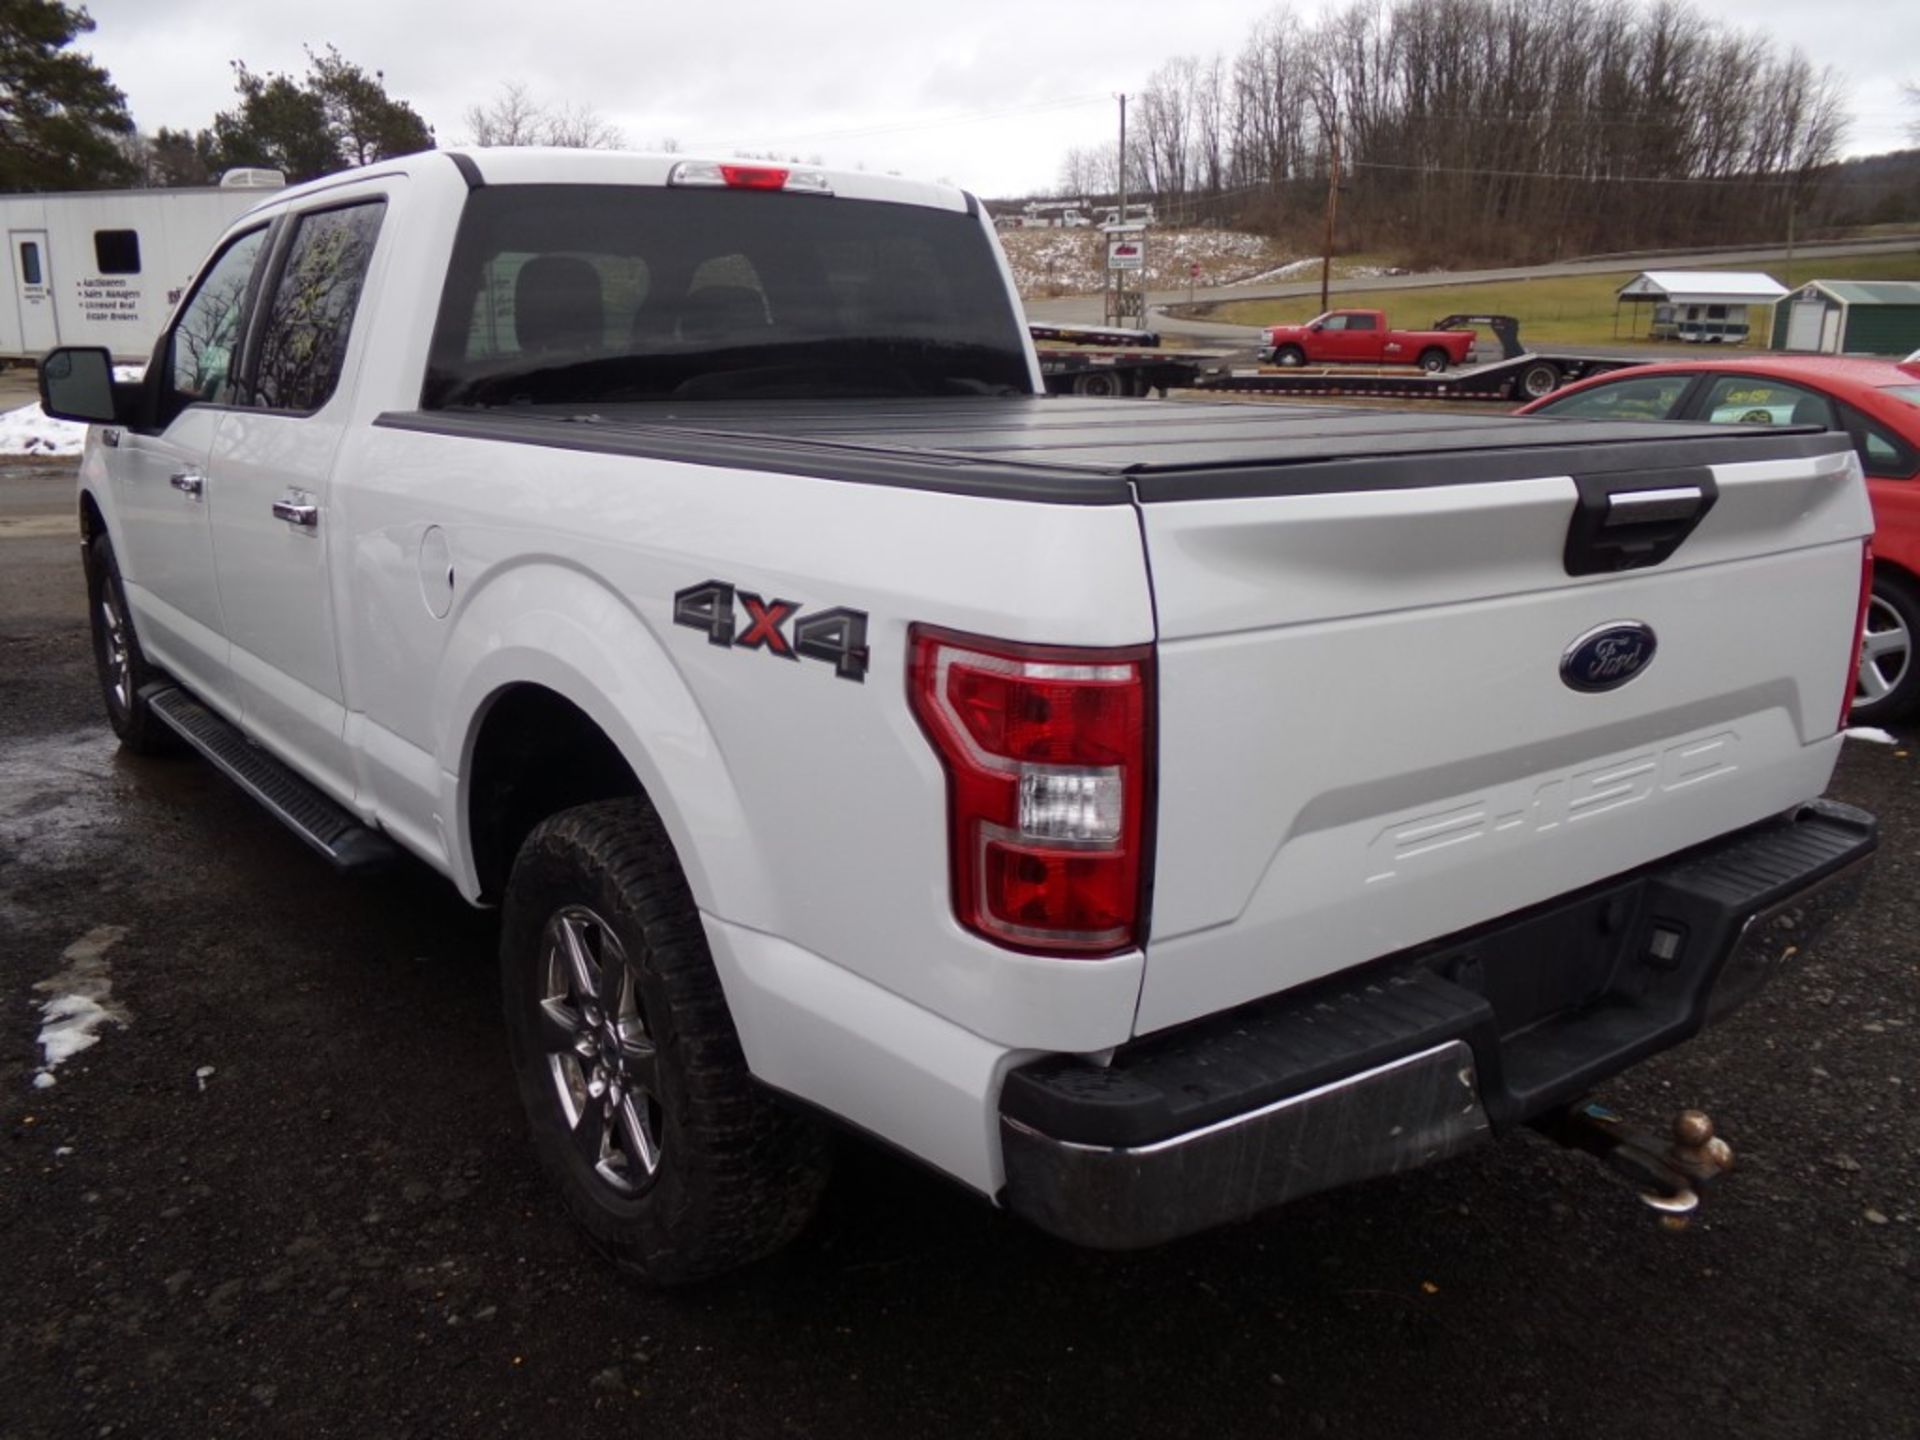 2019 Ford F150 XLT, 4x4, Crew Cab, Toneau Cover, 5.0 V8 Eng, Loaded, White, 147,244 Mi, Vin# - Image 2 of 6